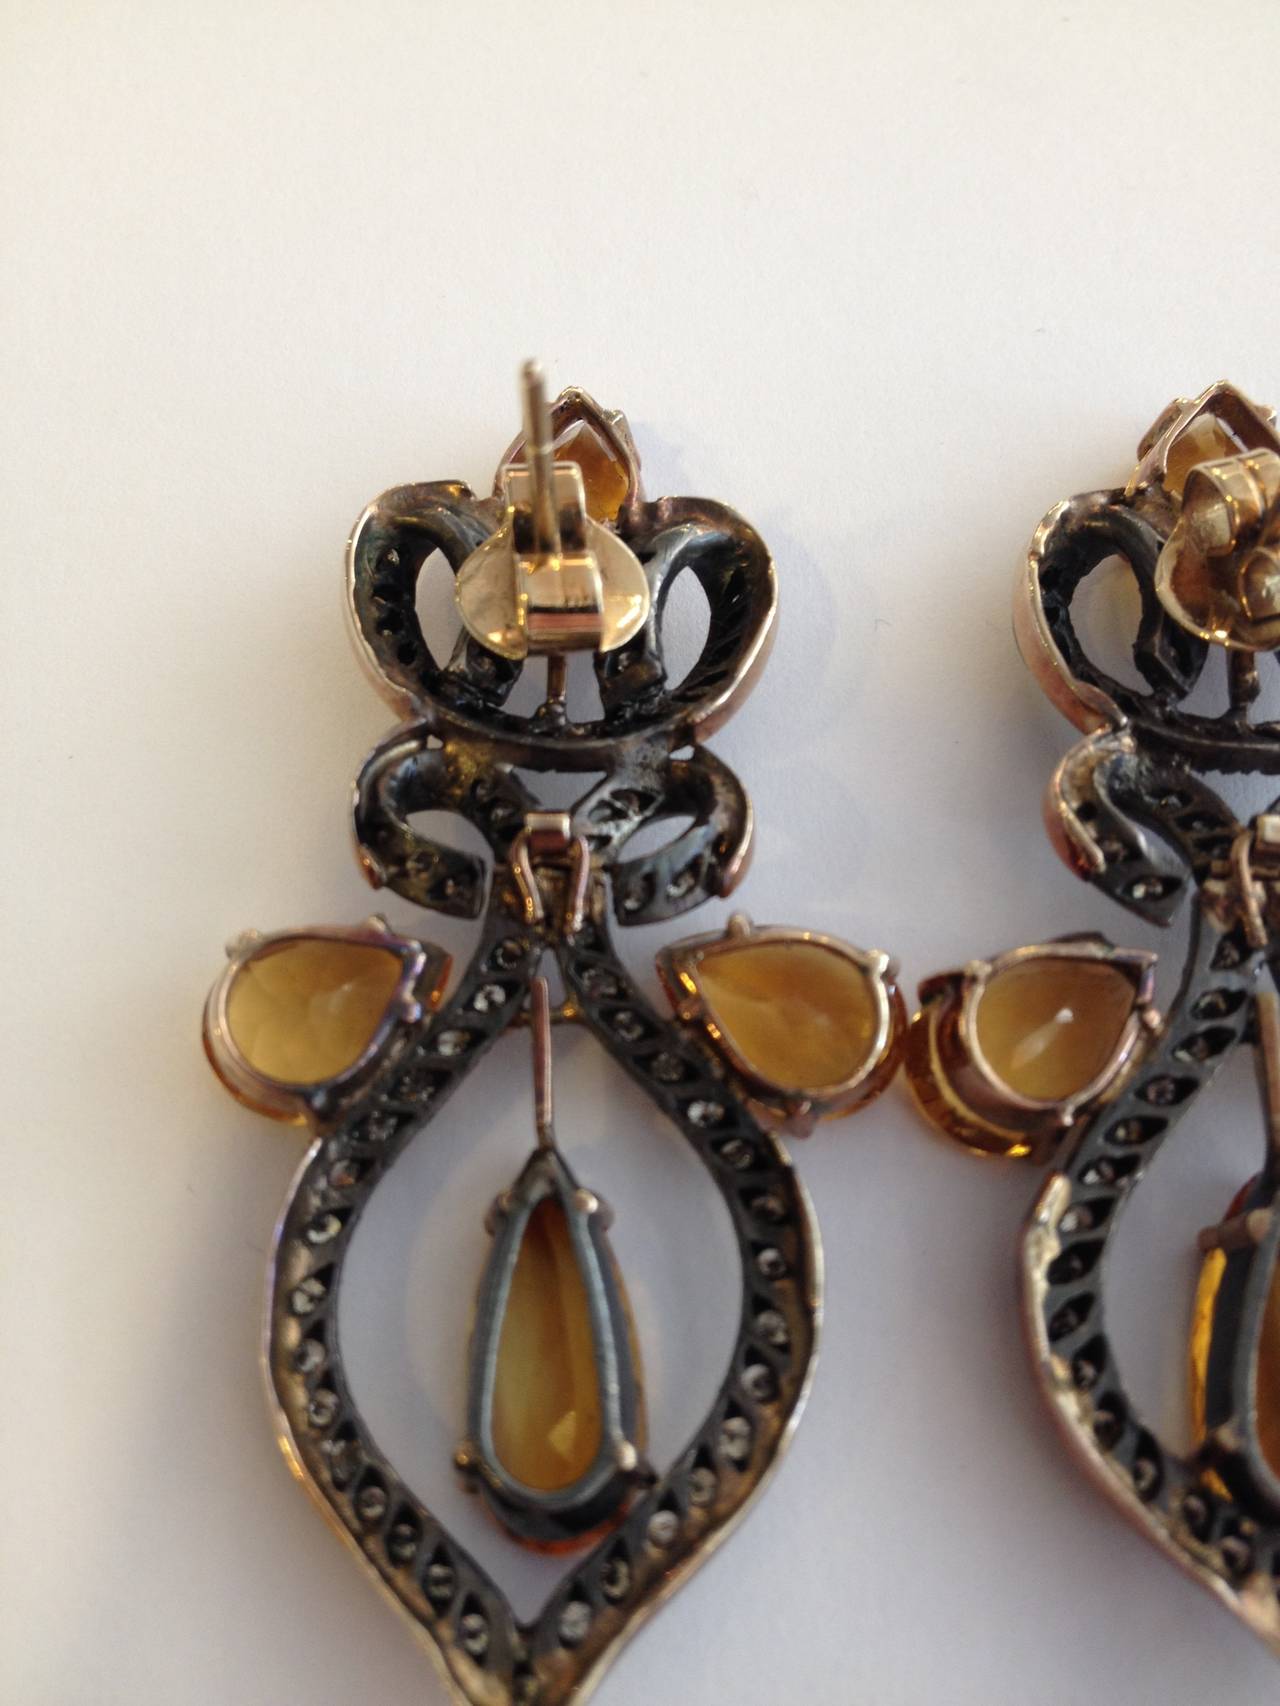 These earrings feature beautiful yellow topaz stones surrounded by diamonds, all set within curling metal ribbons.